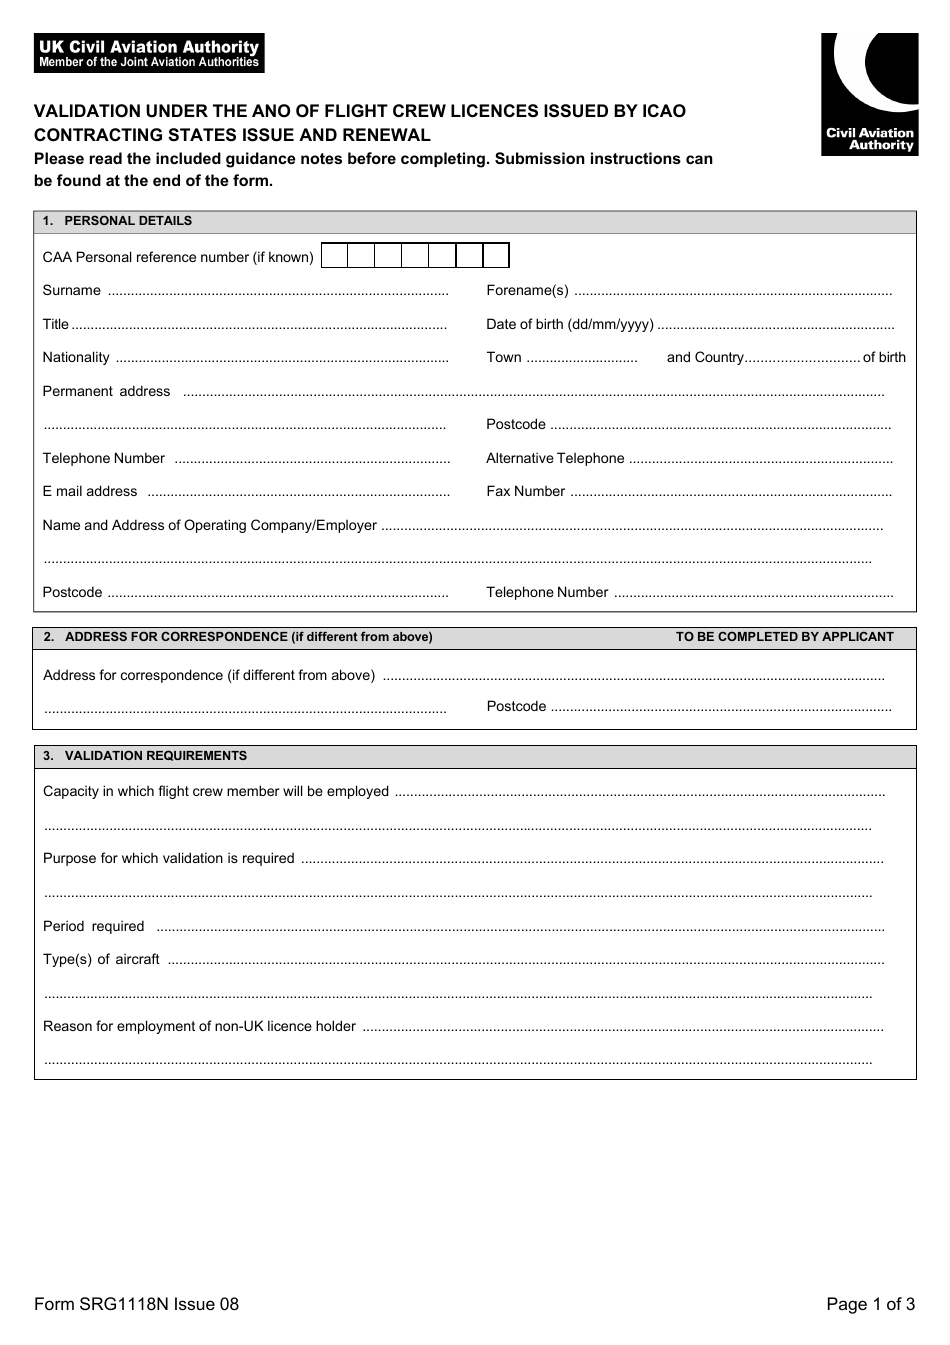 Form SRG1118N Validation Under the Ano of Flight Crew Licences Issued by Icao Contracting States Issue and Renewal - United Kingdom, Page 1